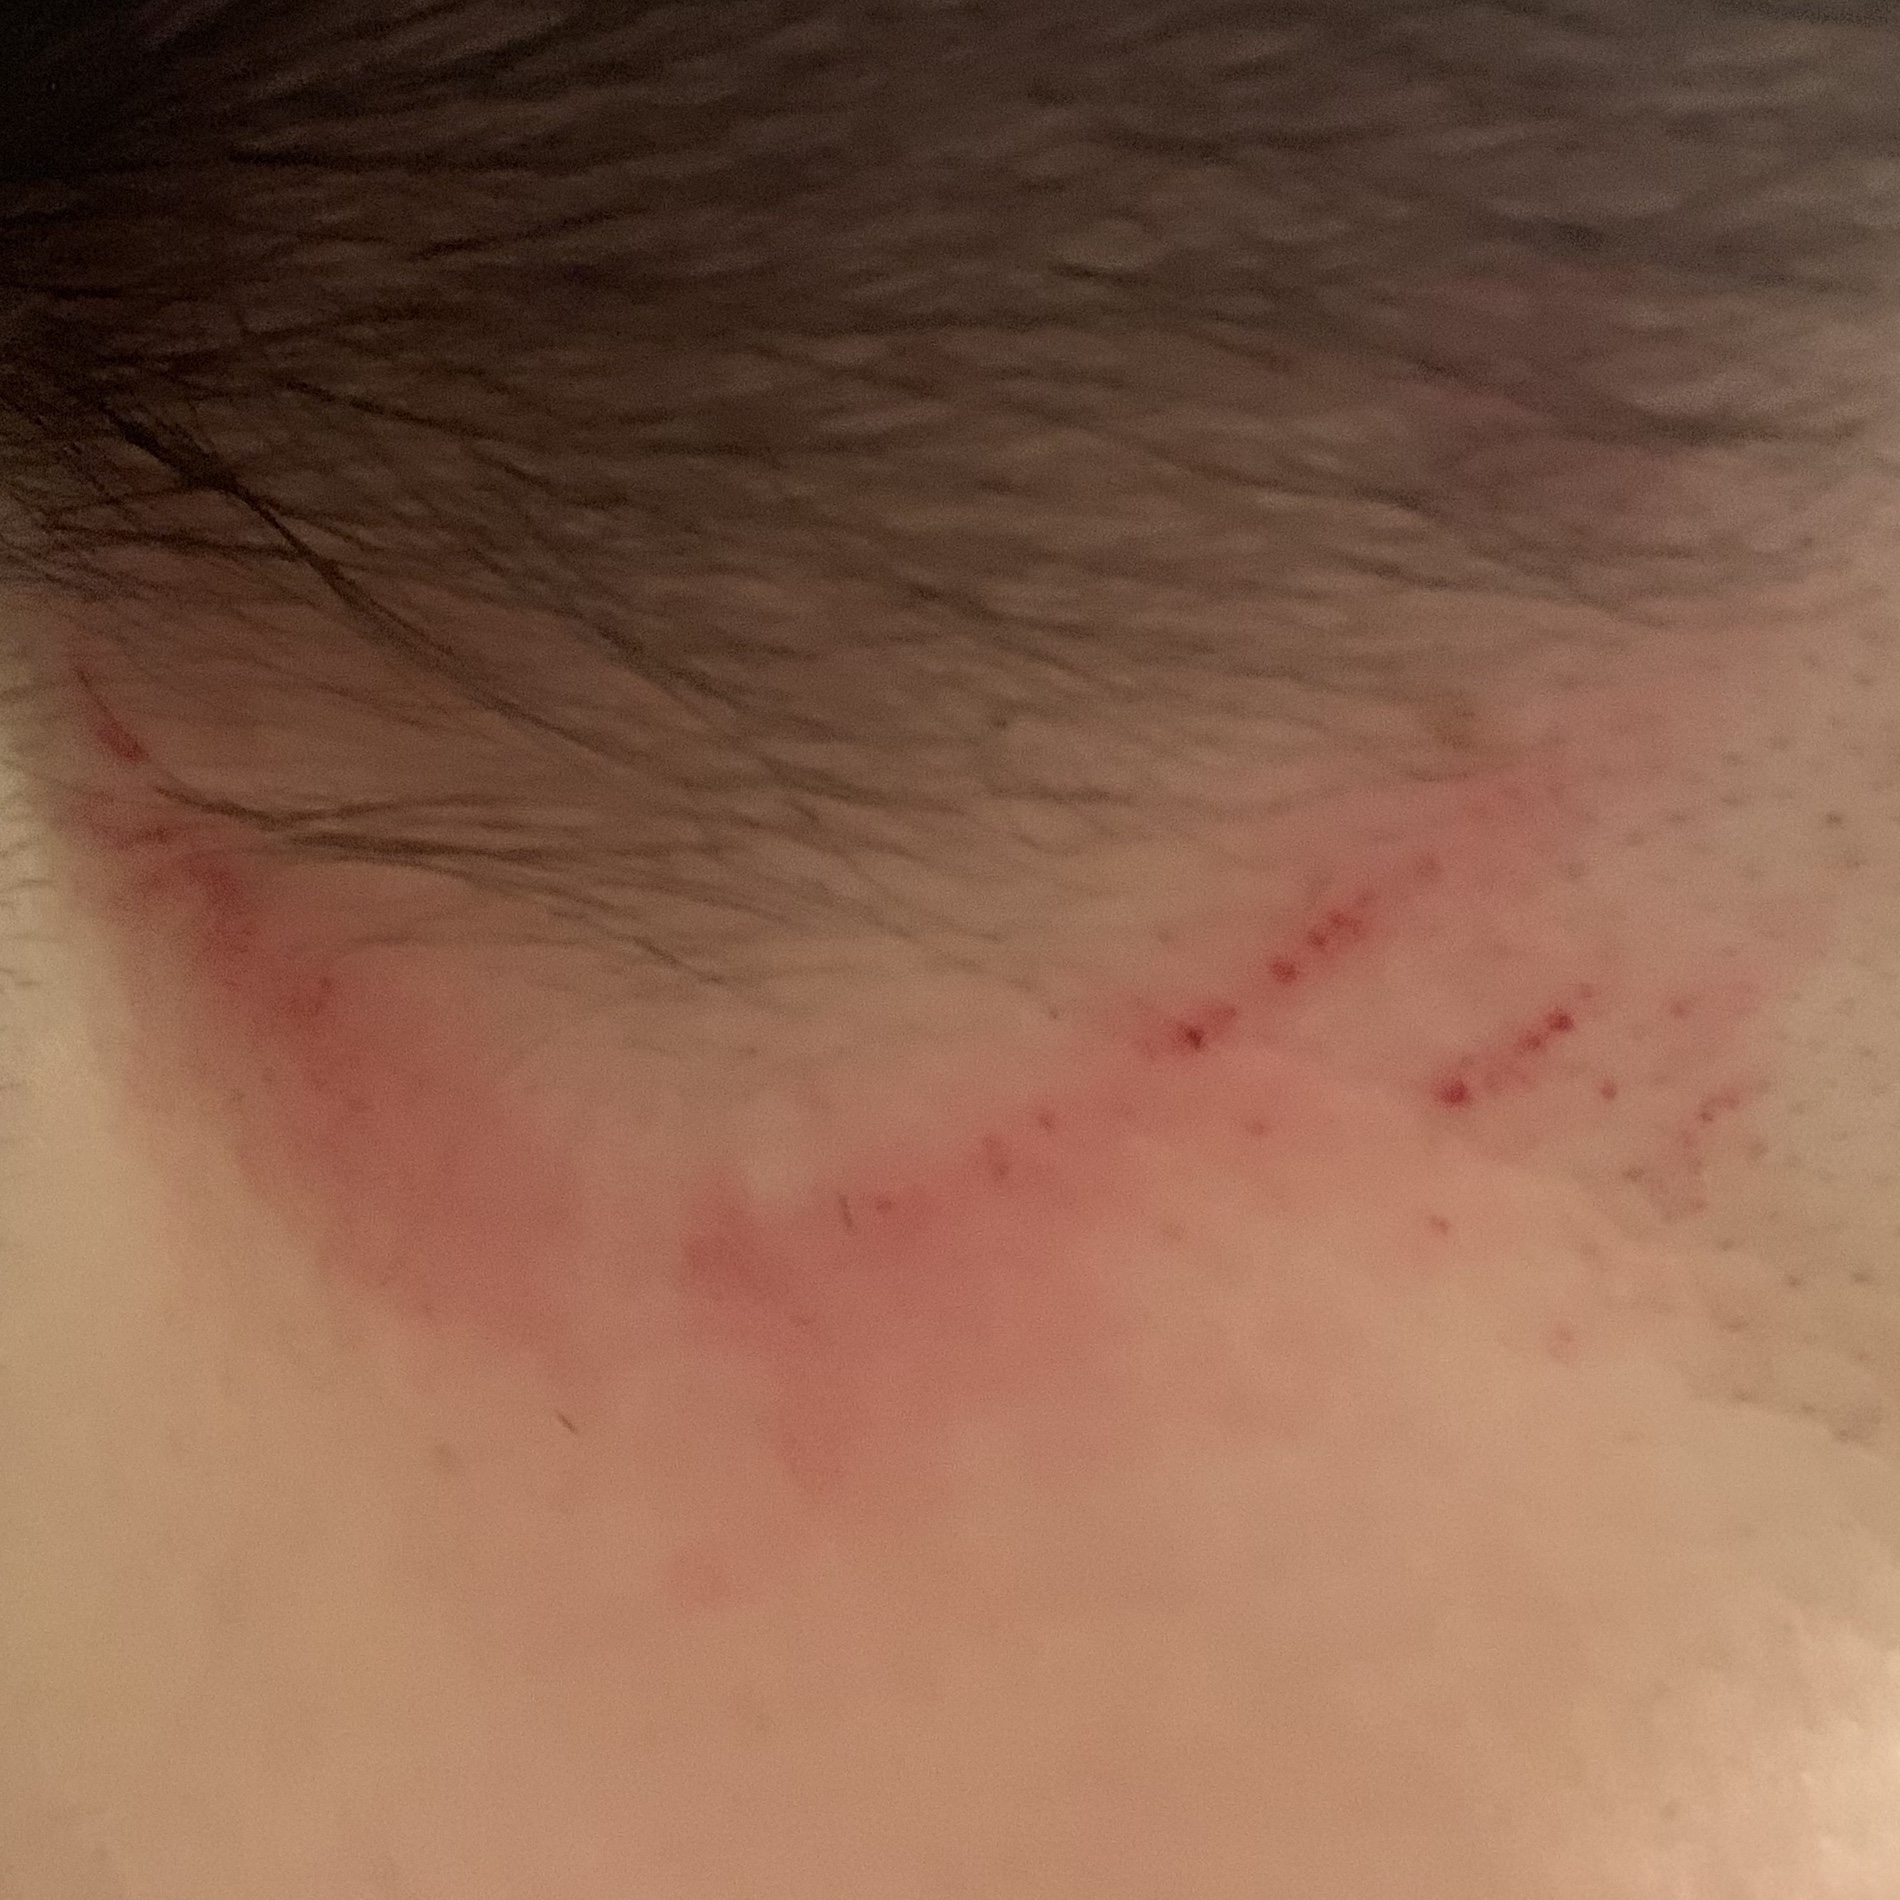 close-up of back of neck nicked by clippers